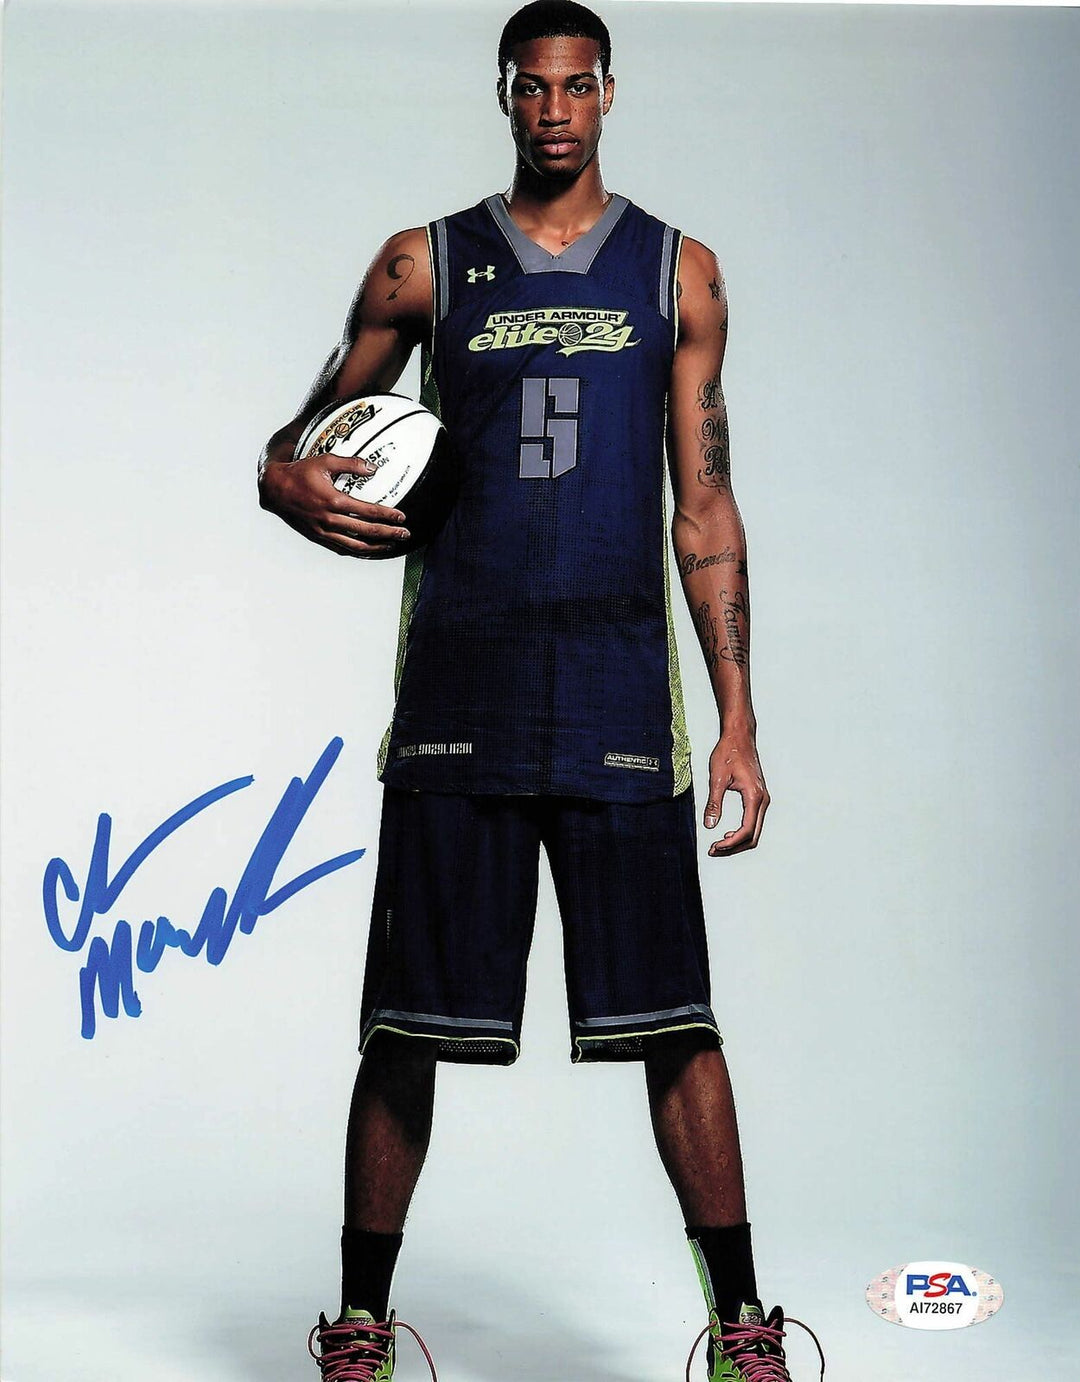 CHRIS McCULLOUGH Signed 8x10 photo PSA/DNA Syracuse Autographed Image 1